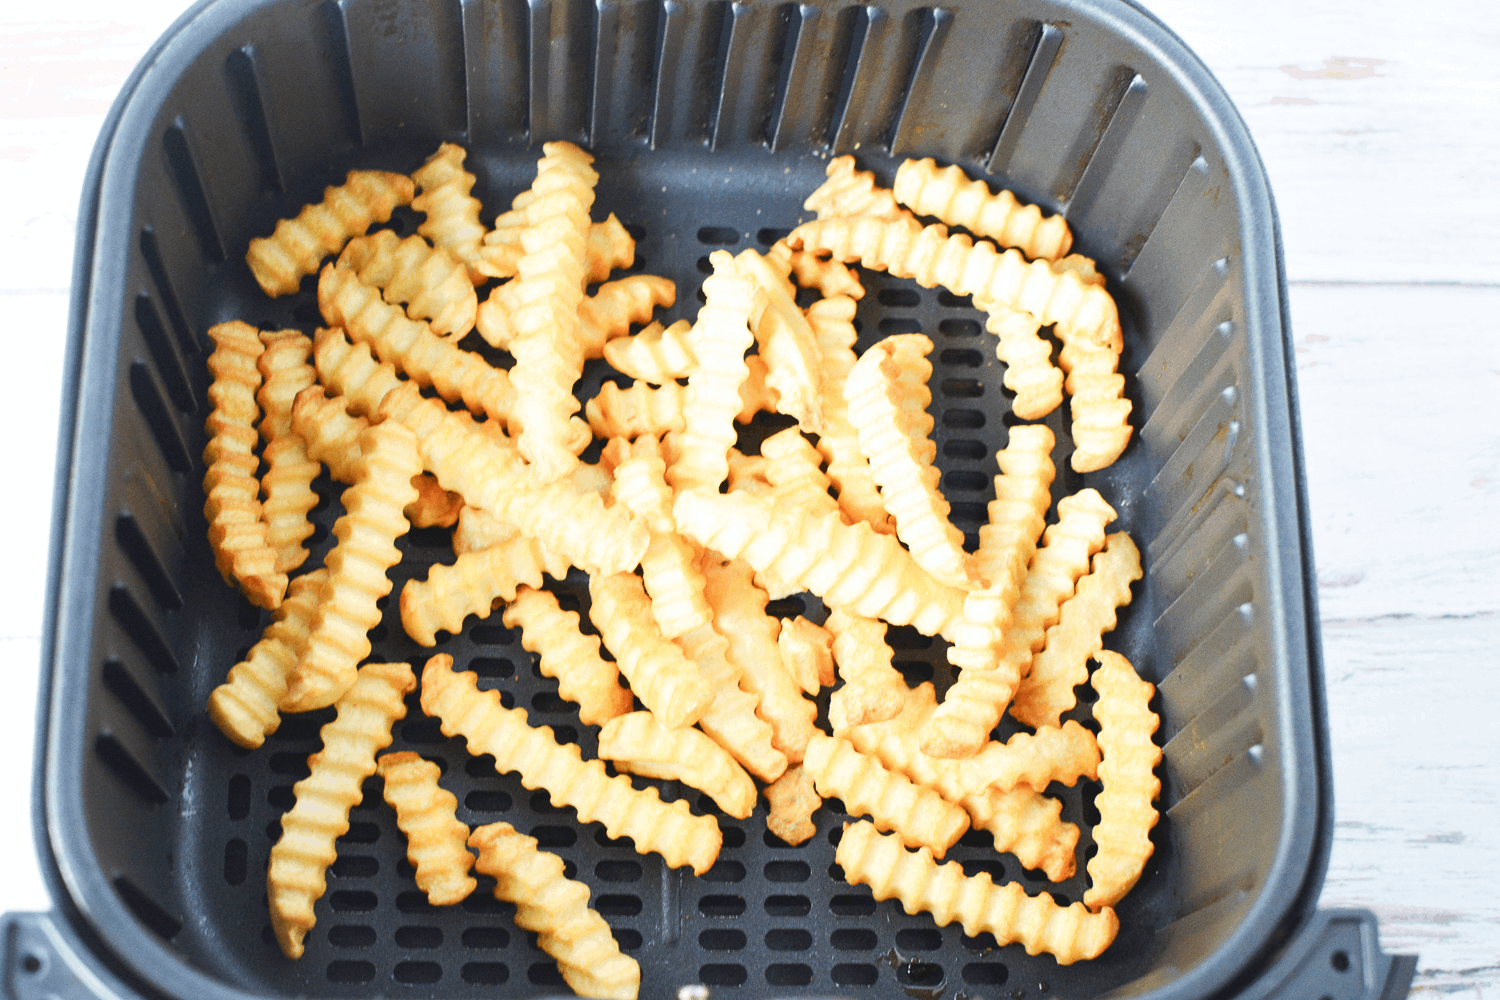 https://therebelchick.com/wp-content/uploads/2023/10/Air-Fryer-Frozen-French-Fries-Recipe-31-resized.png